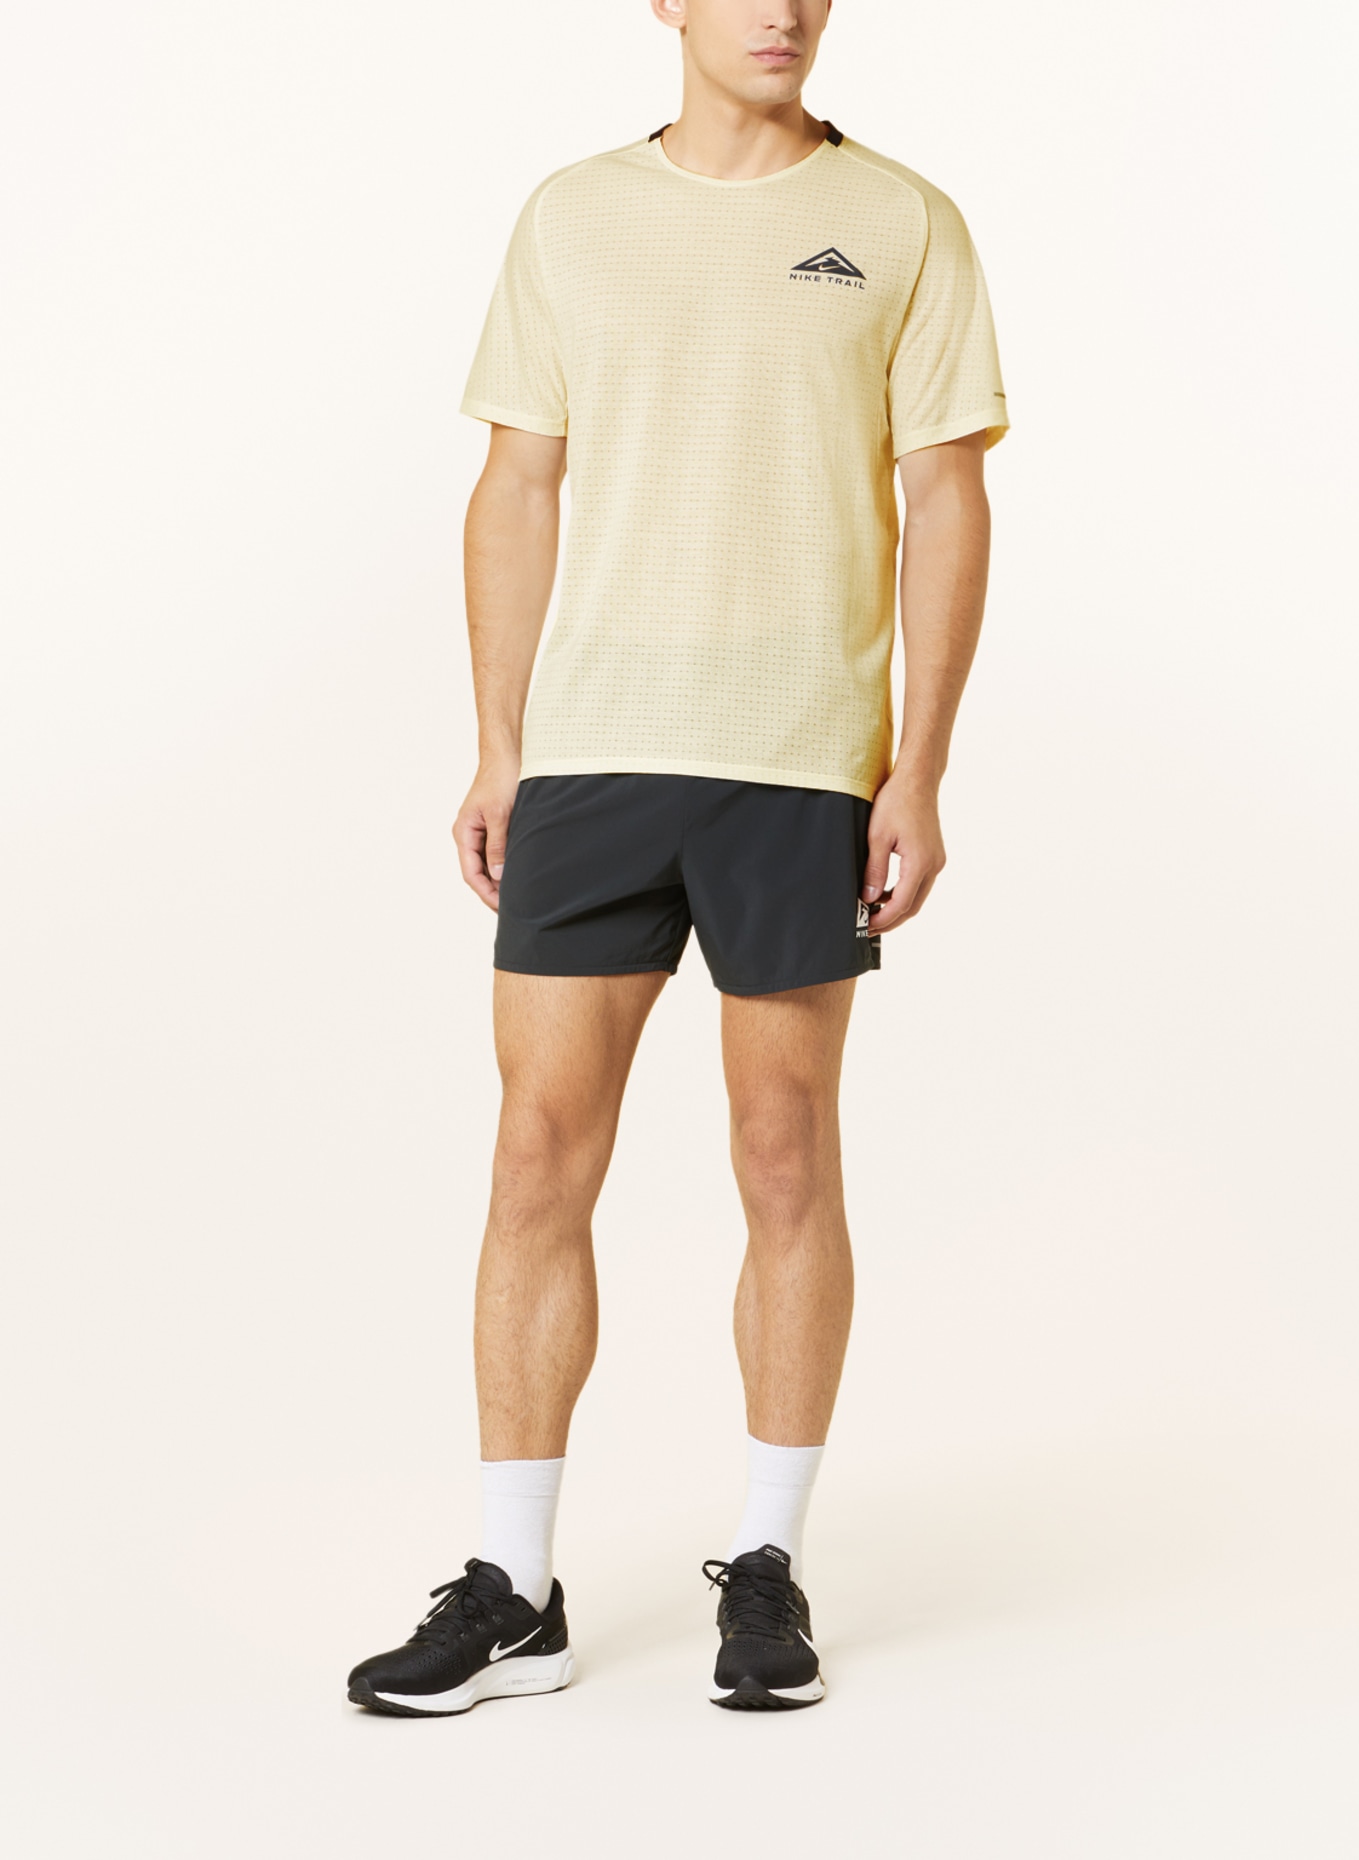 Nike Running shirt DRI-FIT TRAIL SOLAR CHASE, Color: LIGHT YELLOW (Image 2)